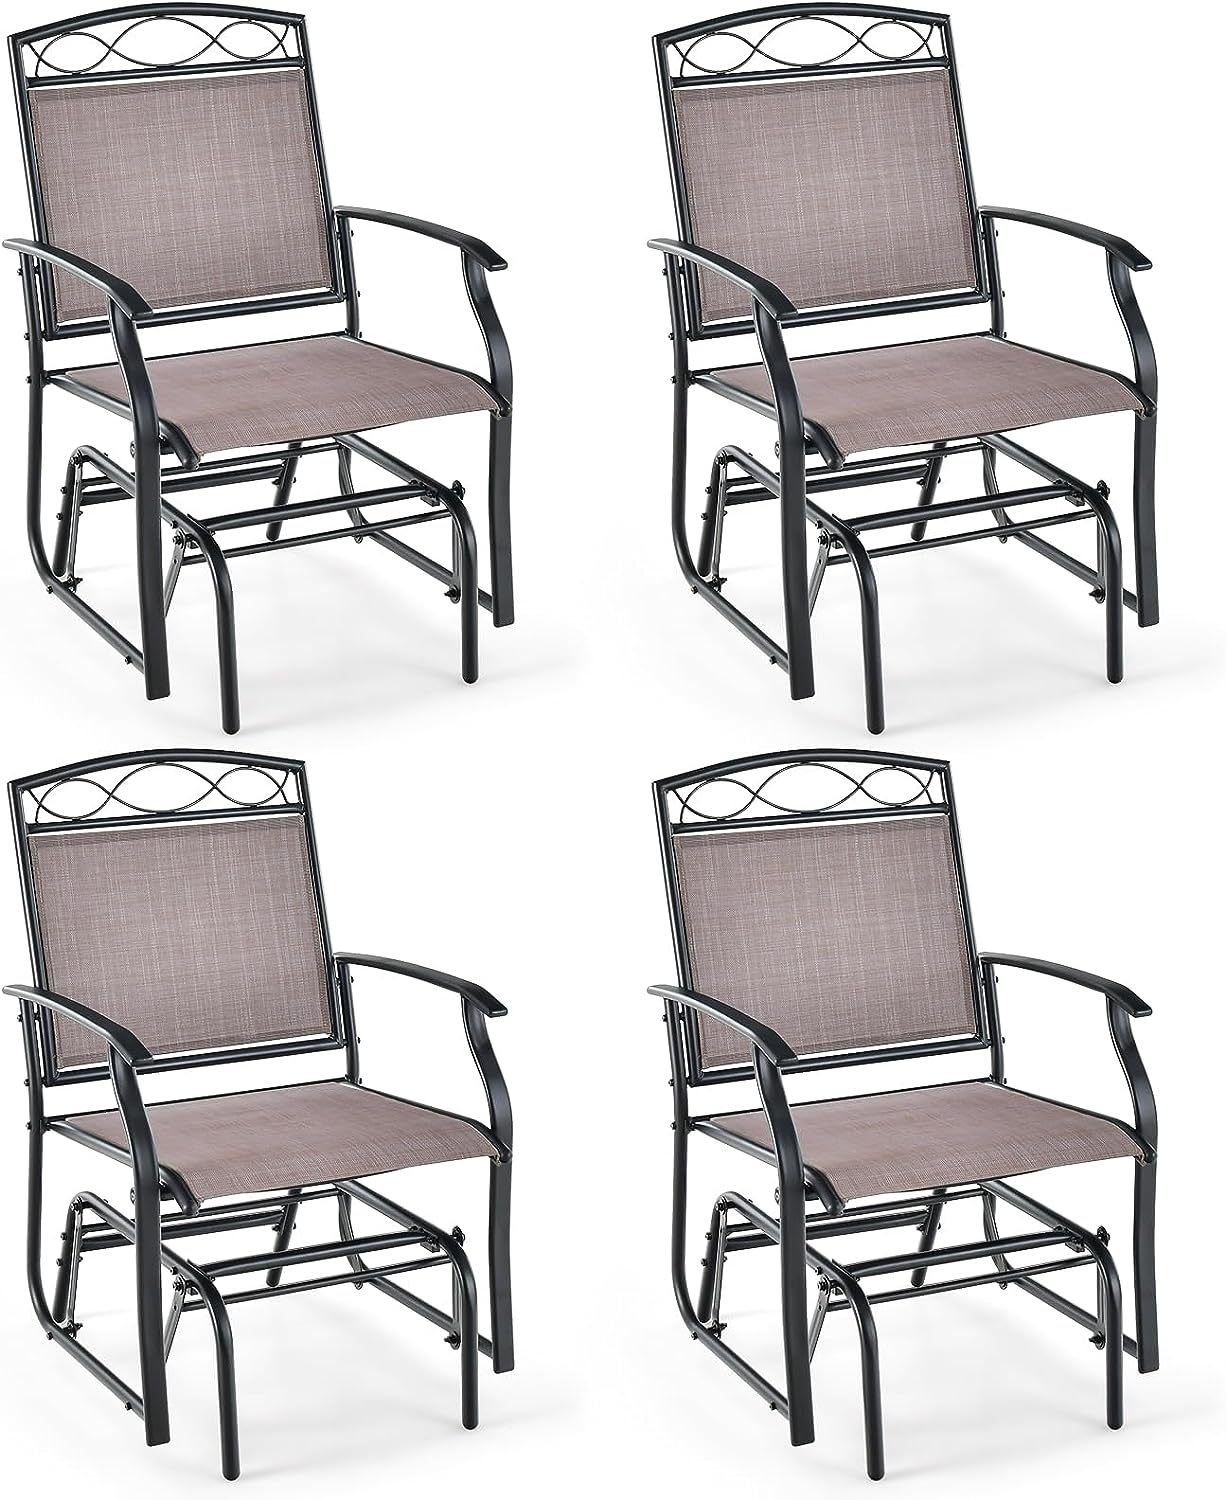 Giantex Patio Glider Chairs Set - 2 PCS Gliding Rocking Chairs w/Weather-Resistant Fabric, Heavy-Duty Metal Frame